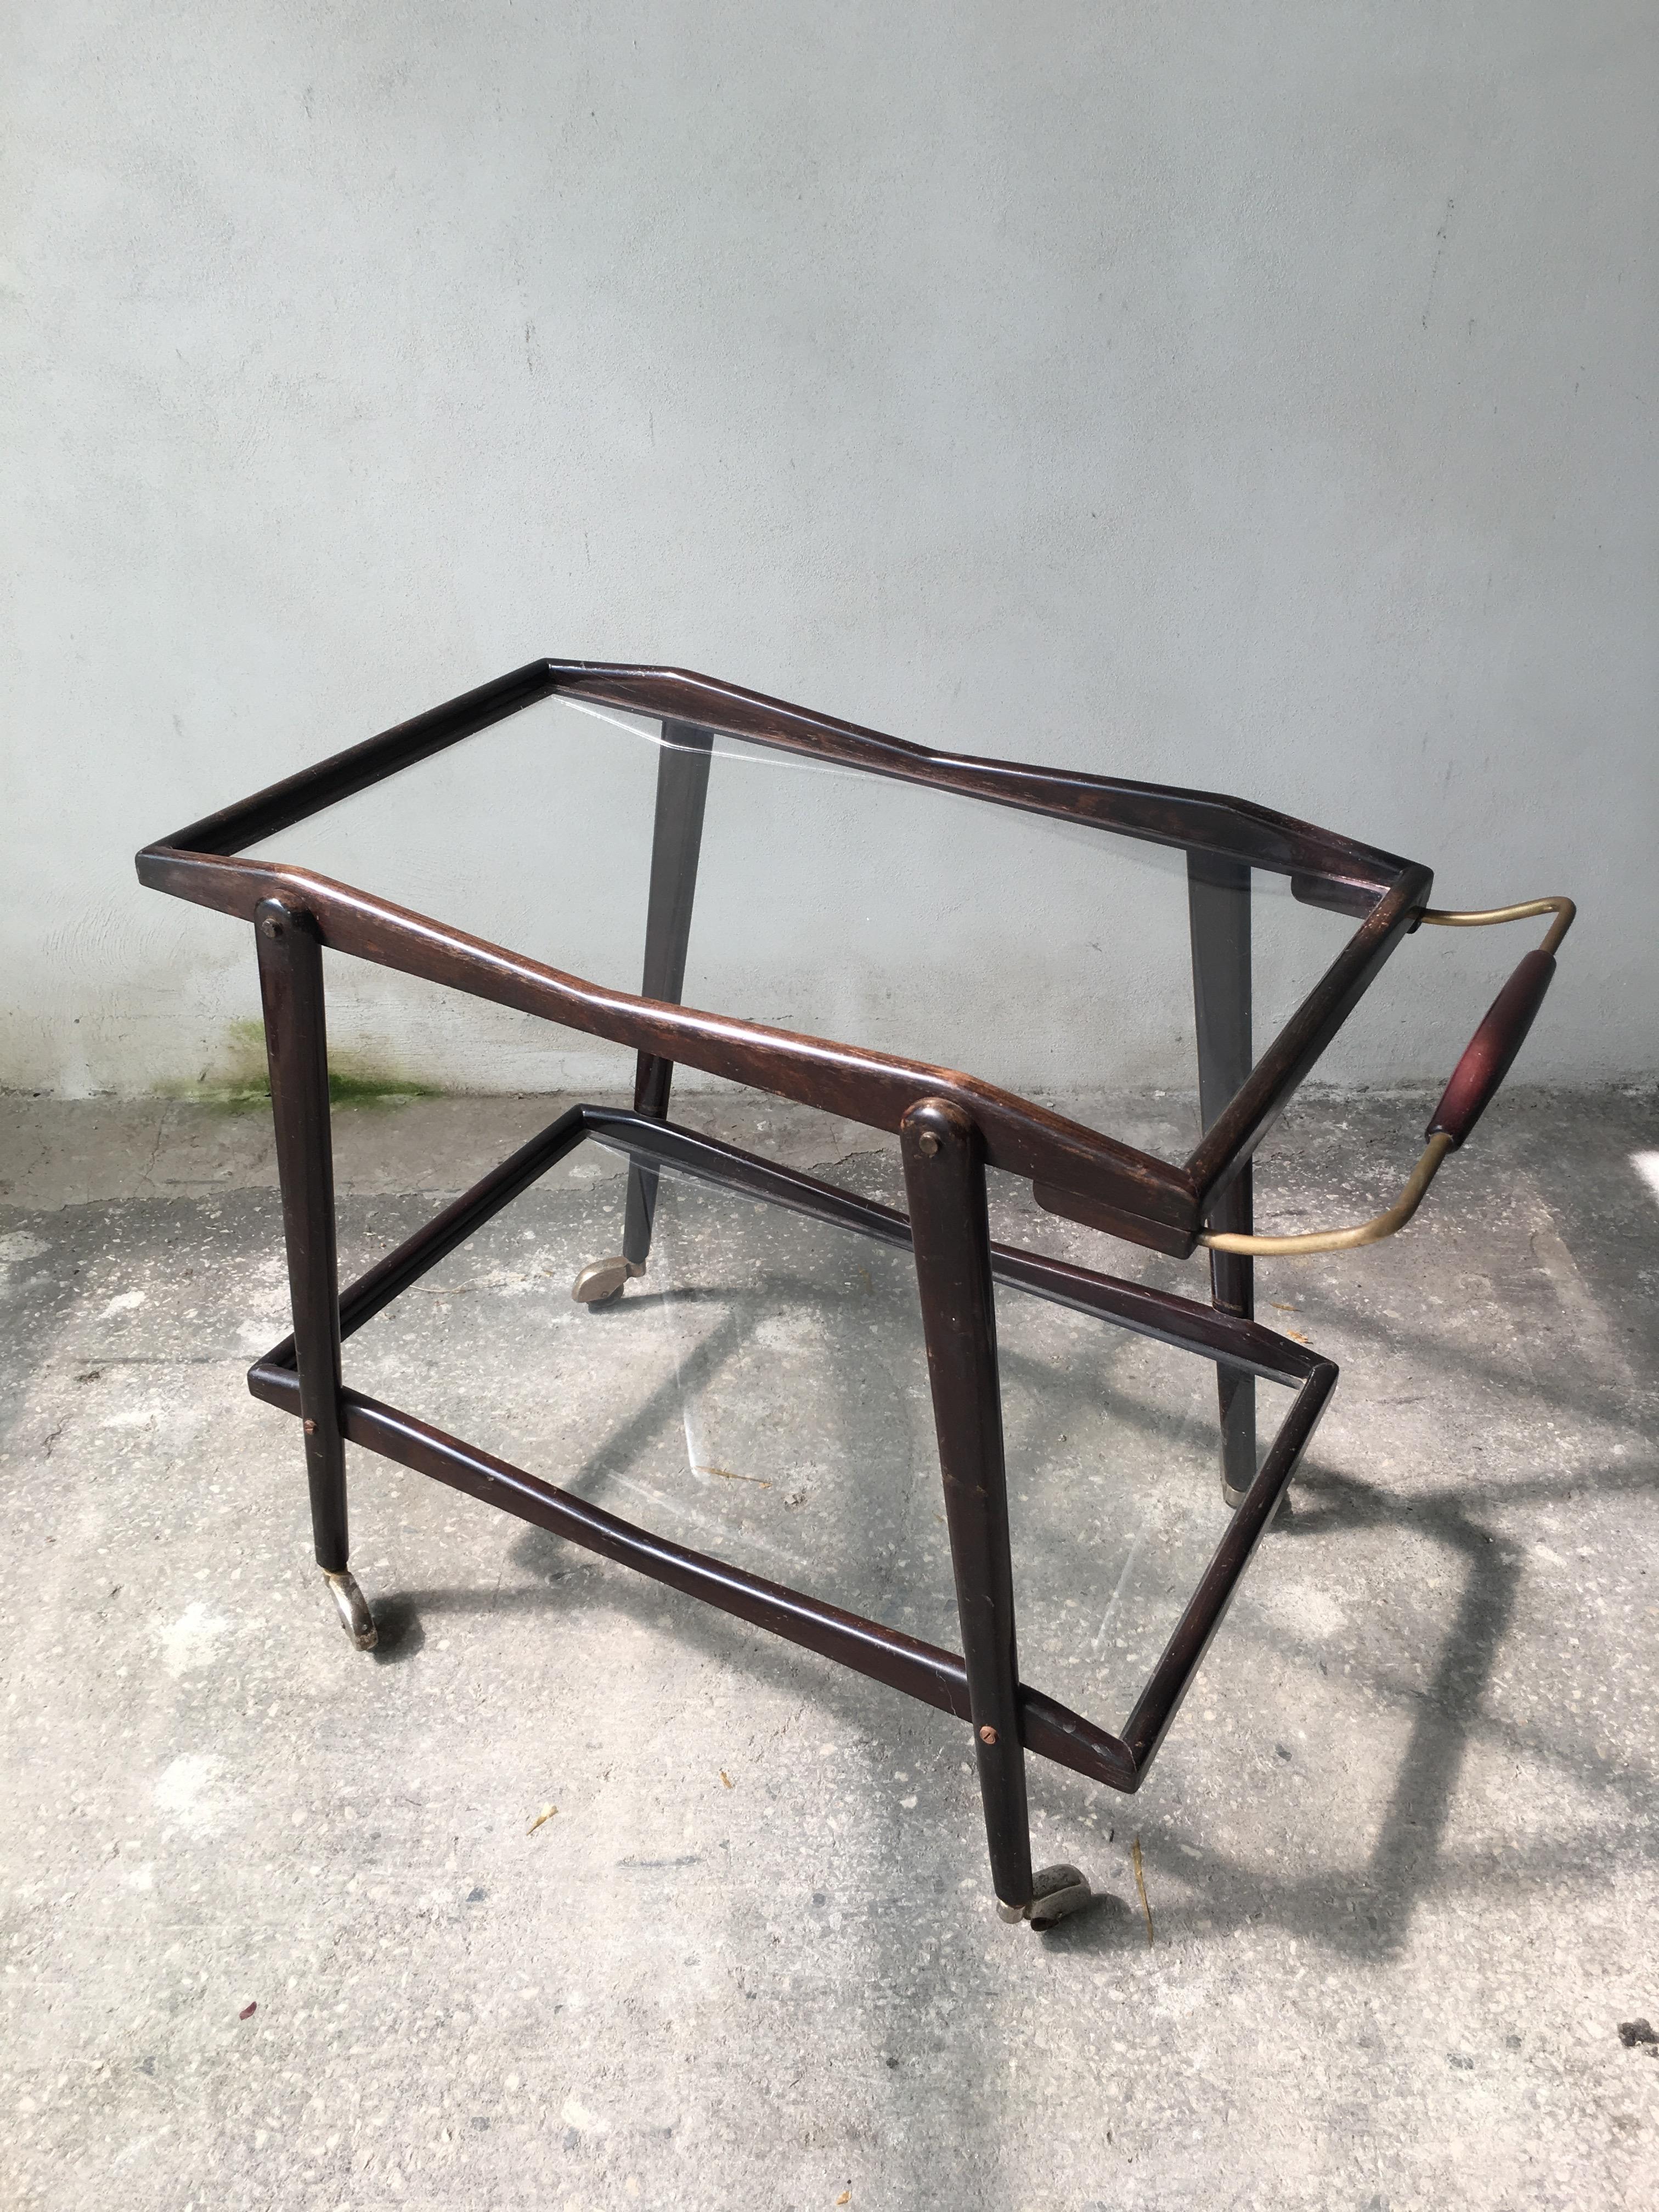 Mahogany Italian Bar Cart or Trolley Designed by Cesare Lacca, 1950s (Italienisch) im Angebot